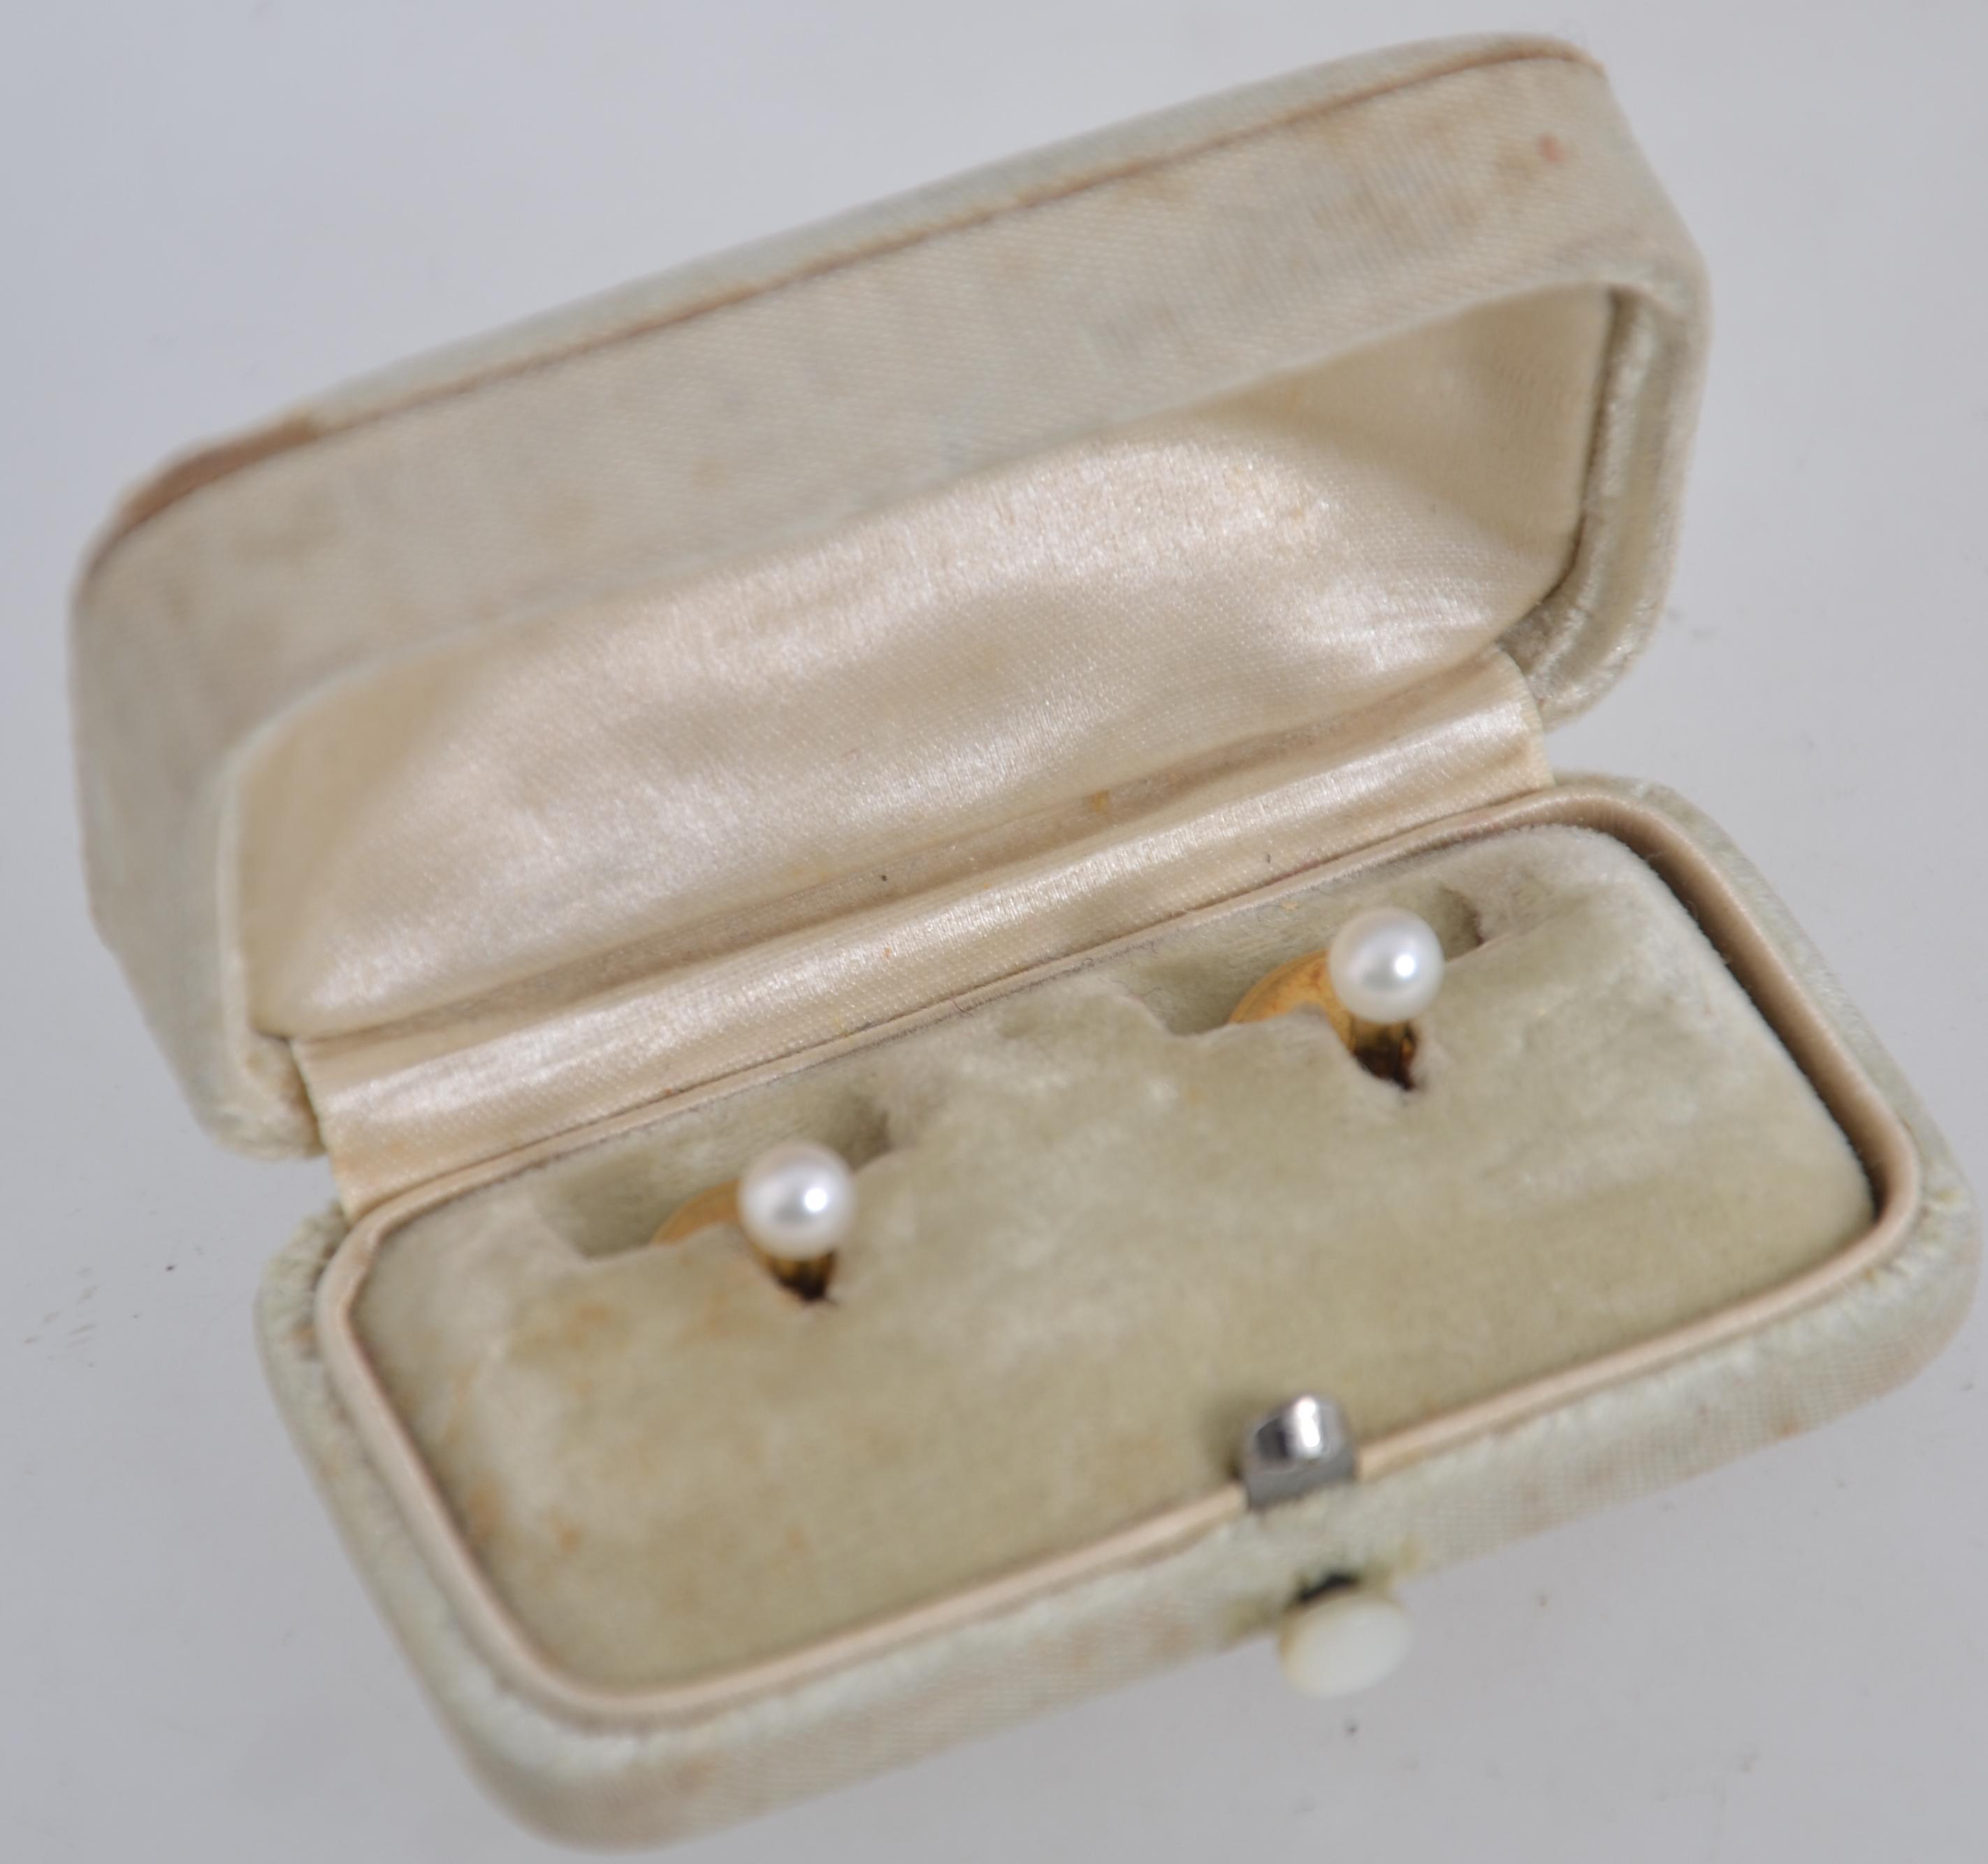 A pair of 18ct gold and pearl shirt dress studs in original fitted presentation box from the - Image 2 of 2